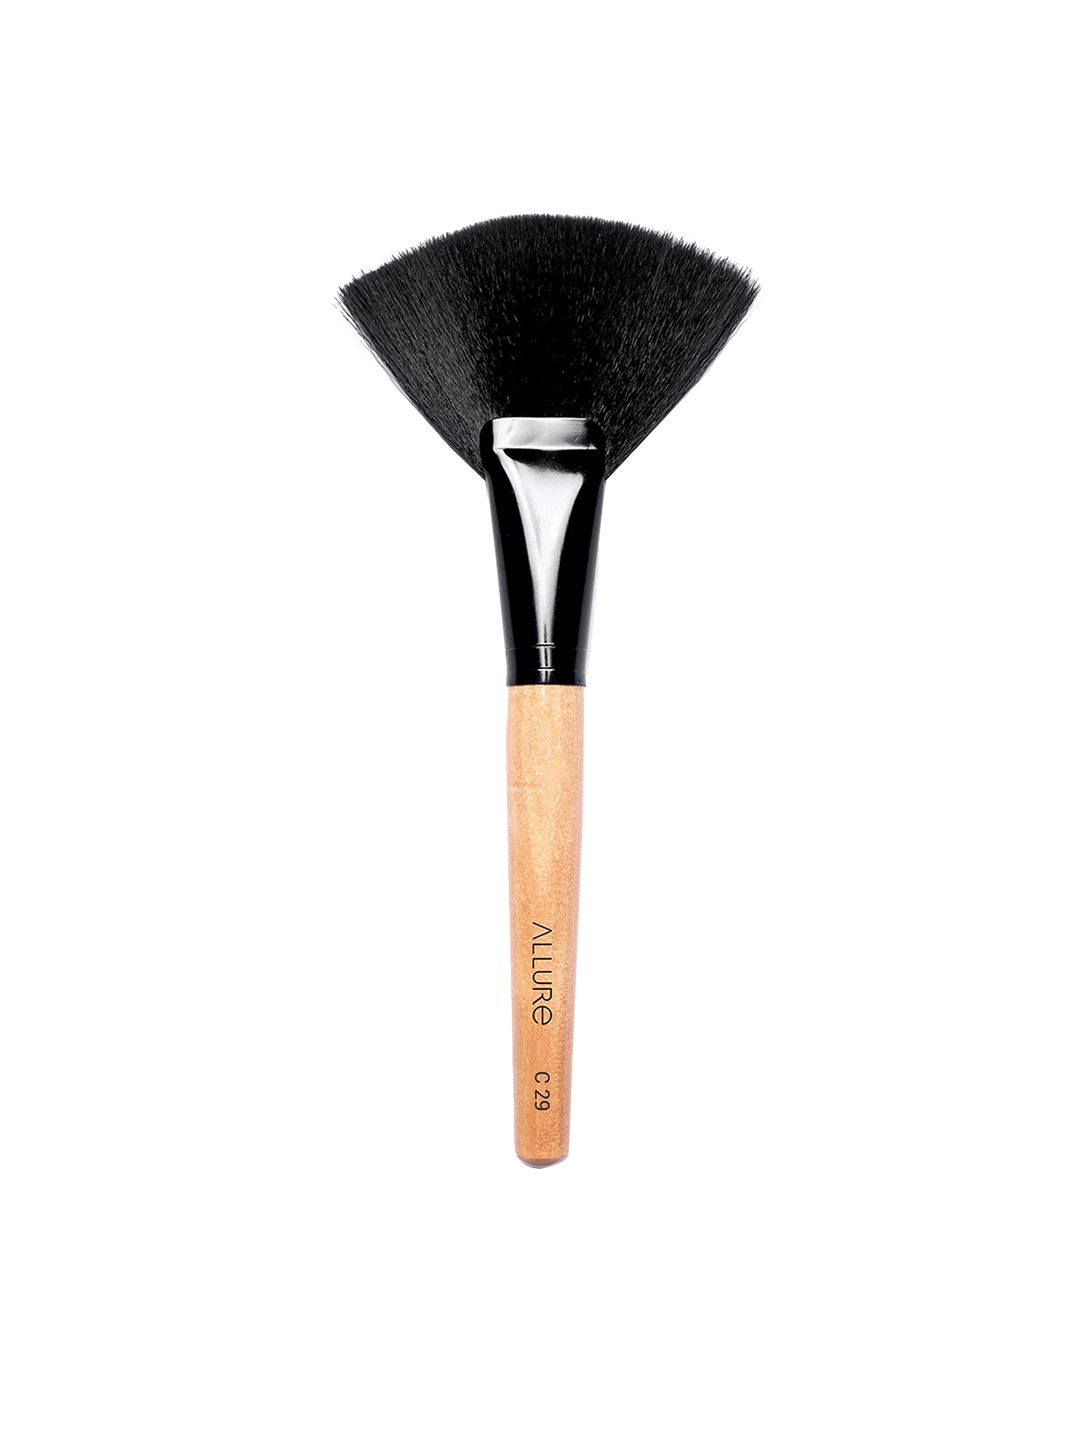 ALLURE Wooden Large Fan Brush C-29 Price in India